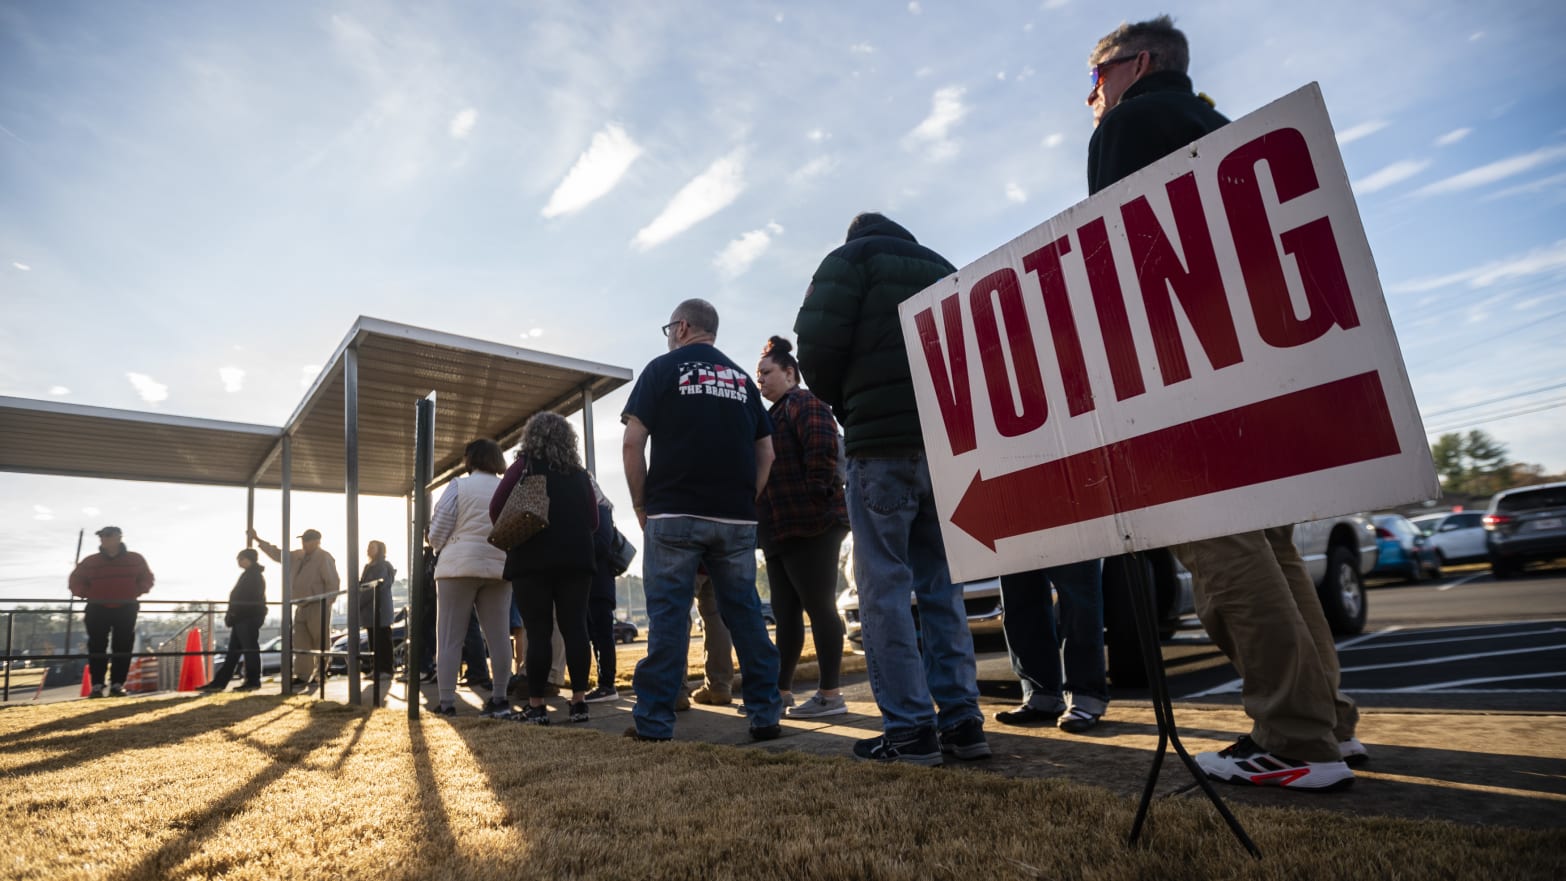 People are seen in line to vote at the sole polling place open for Saturday early voting in Bartow County.